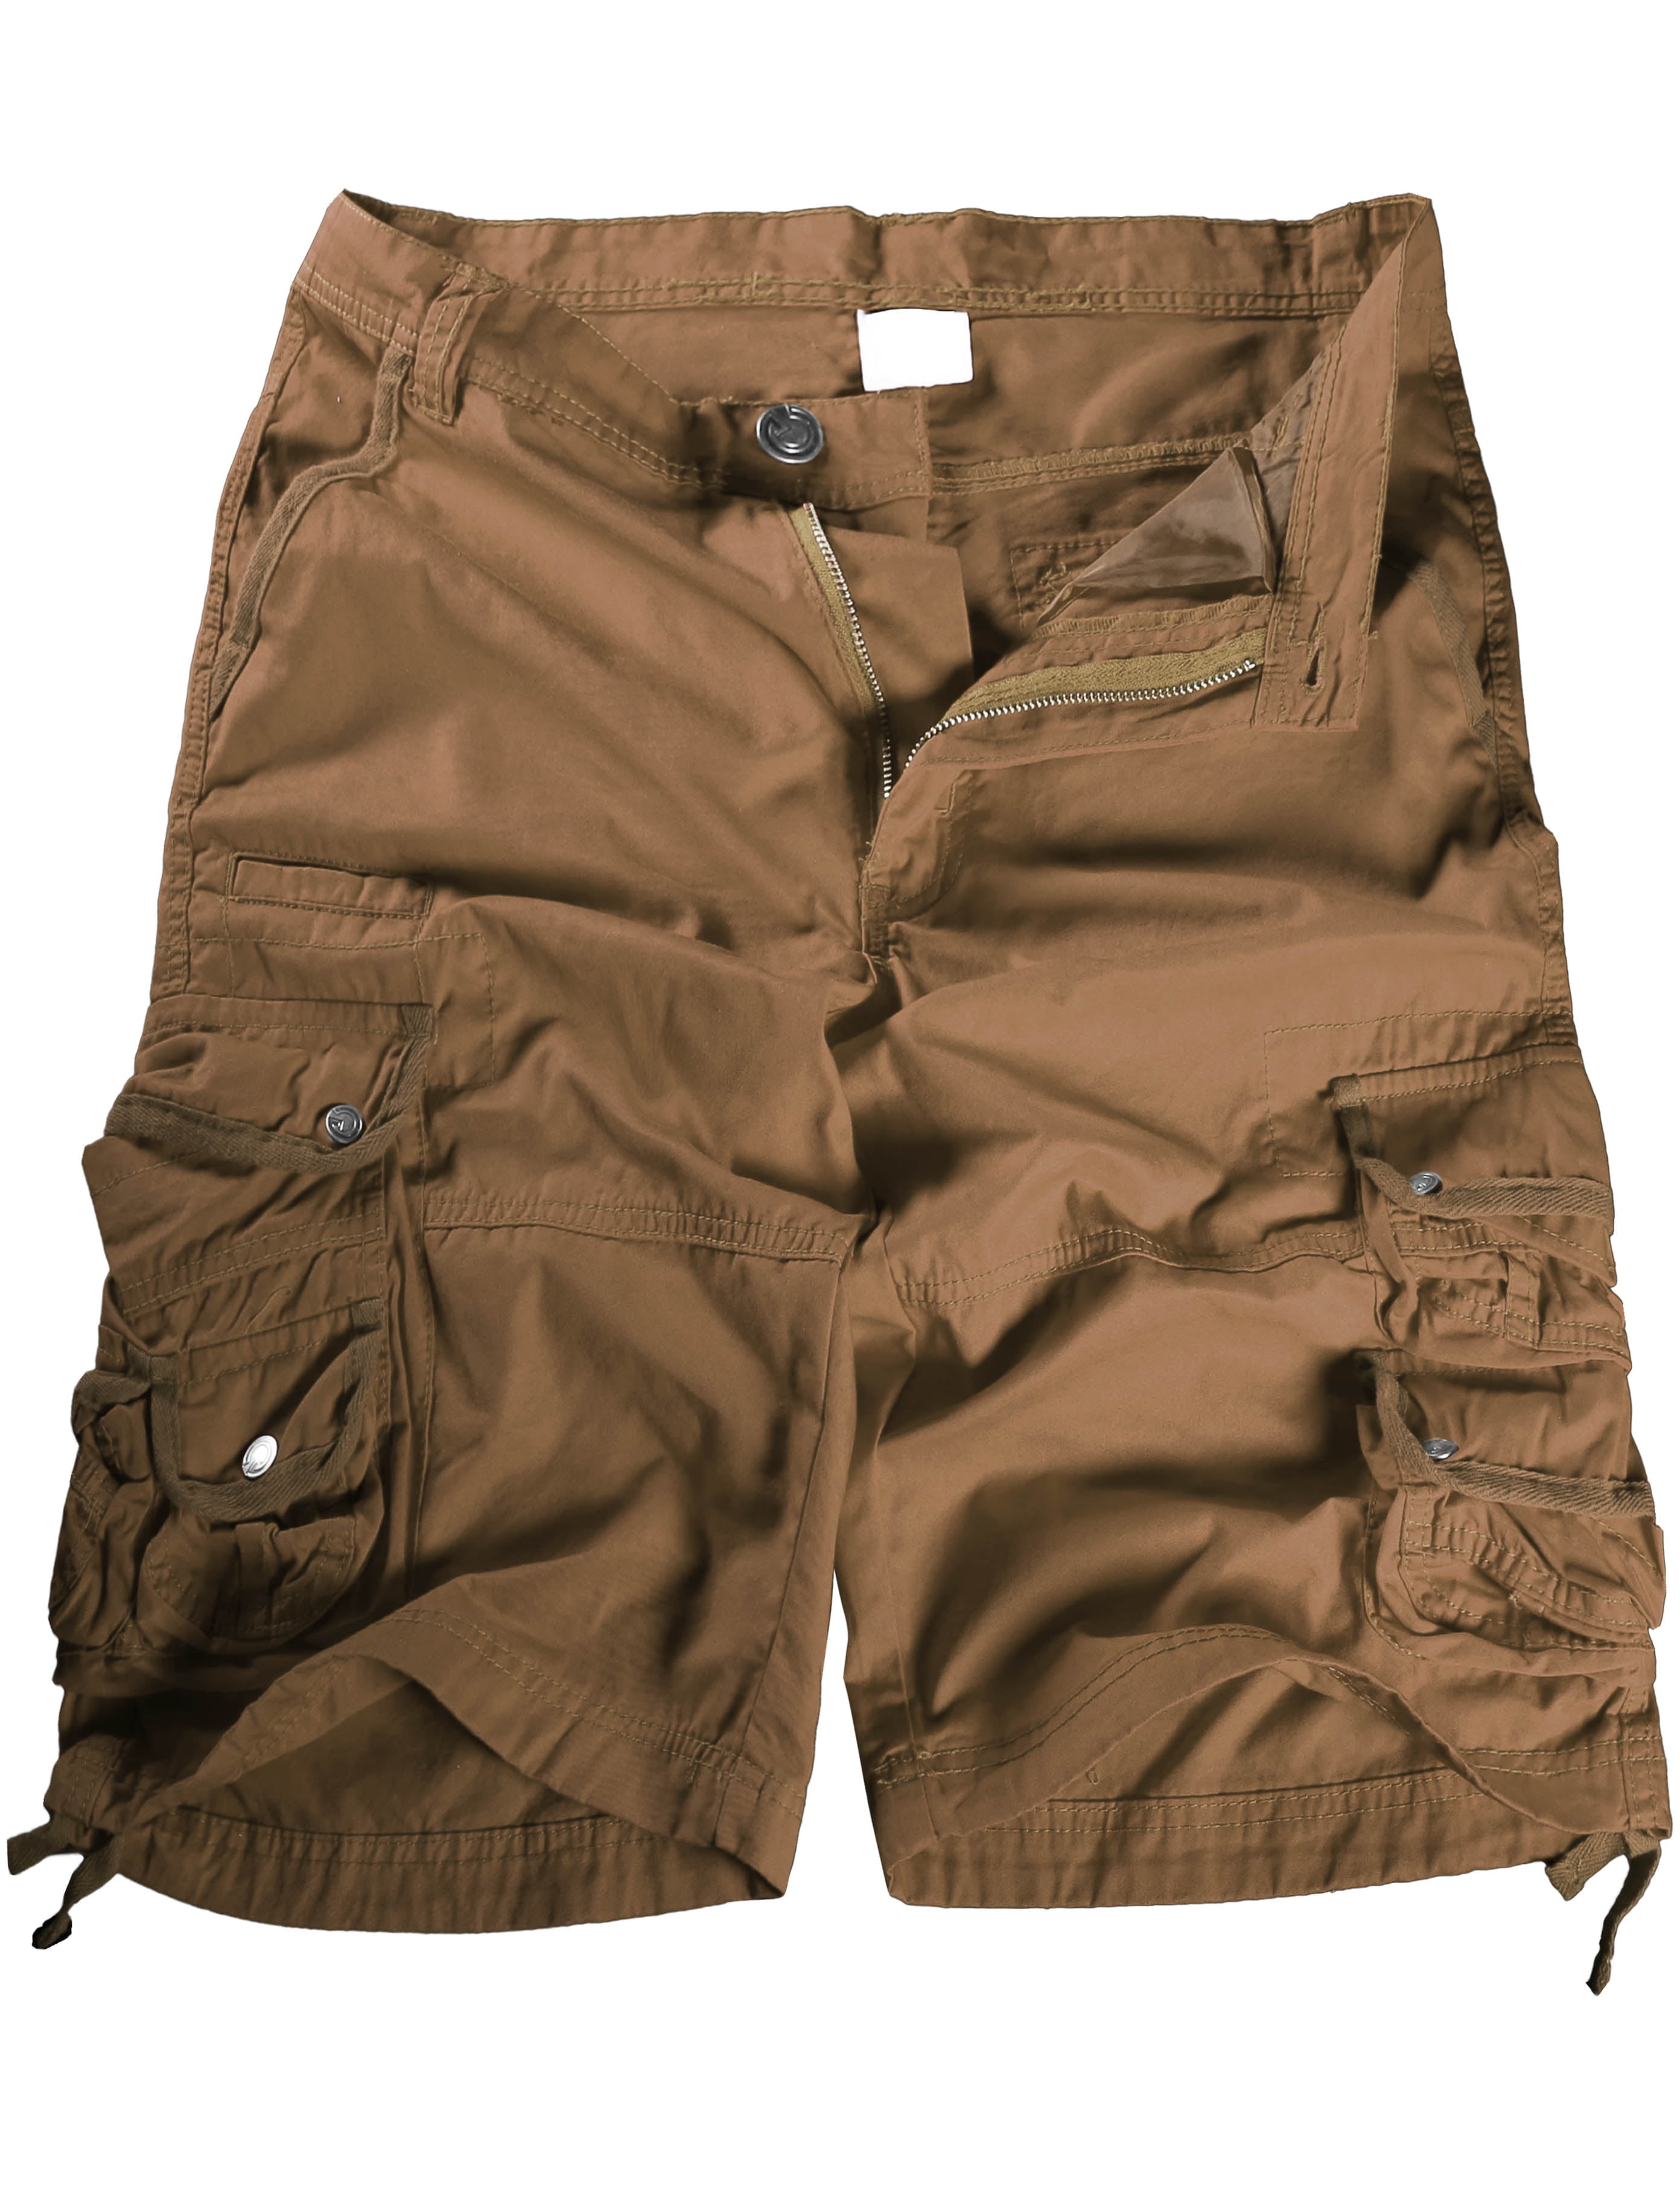 Ma Croix Mens Premium Cargo Shorts with Belt Outdoor Twill Cotton Loose Fit Multi Pocket Pants